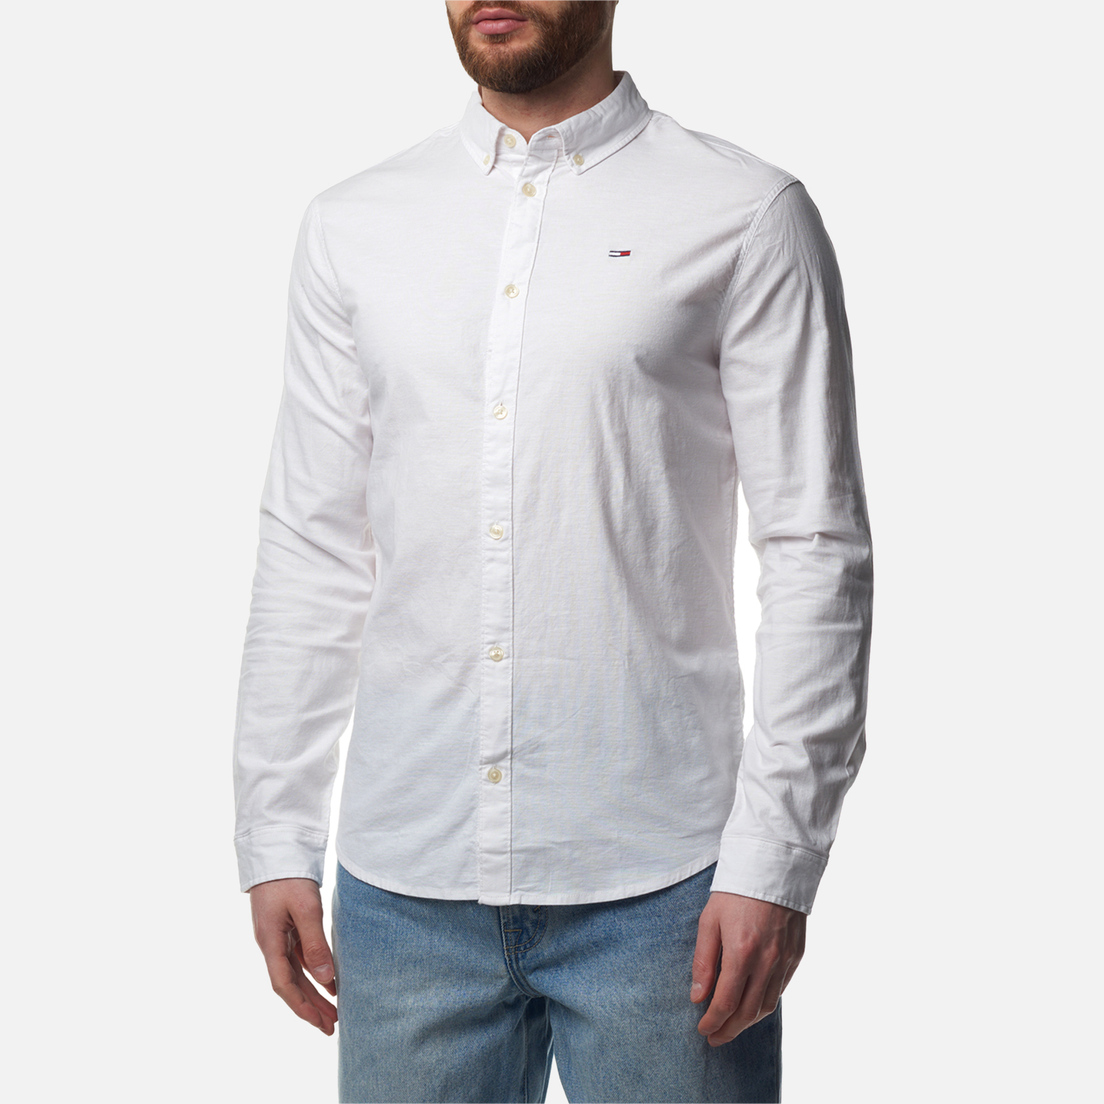 Tommy Jeans Мужская рубашка Stretch Oxford Cotton Slim Fit